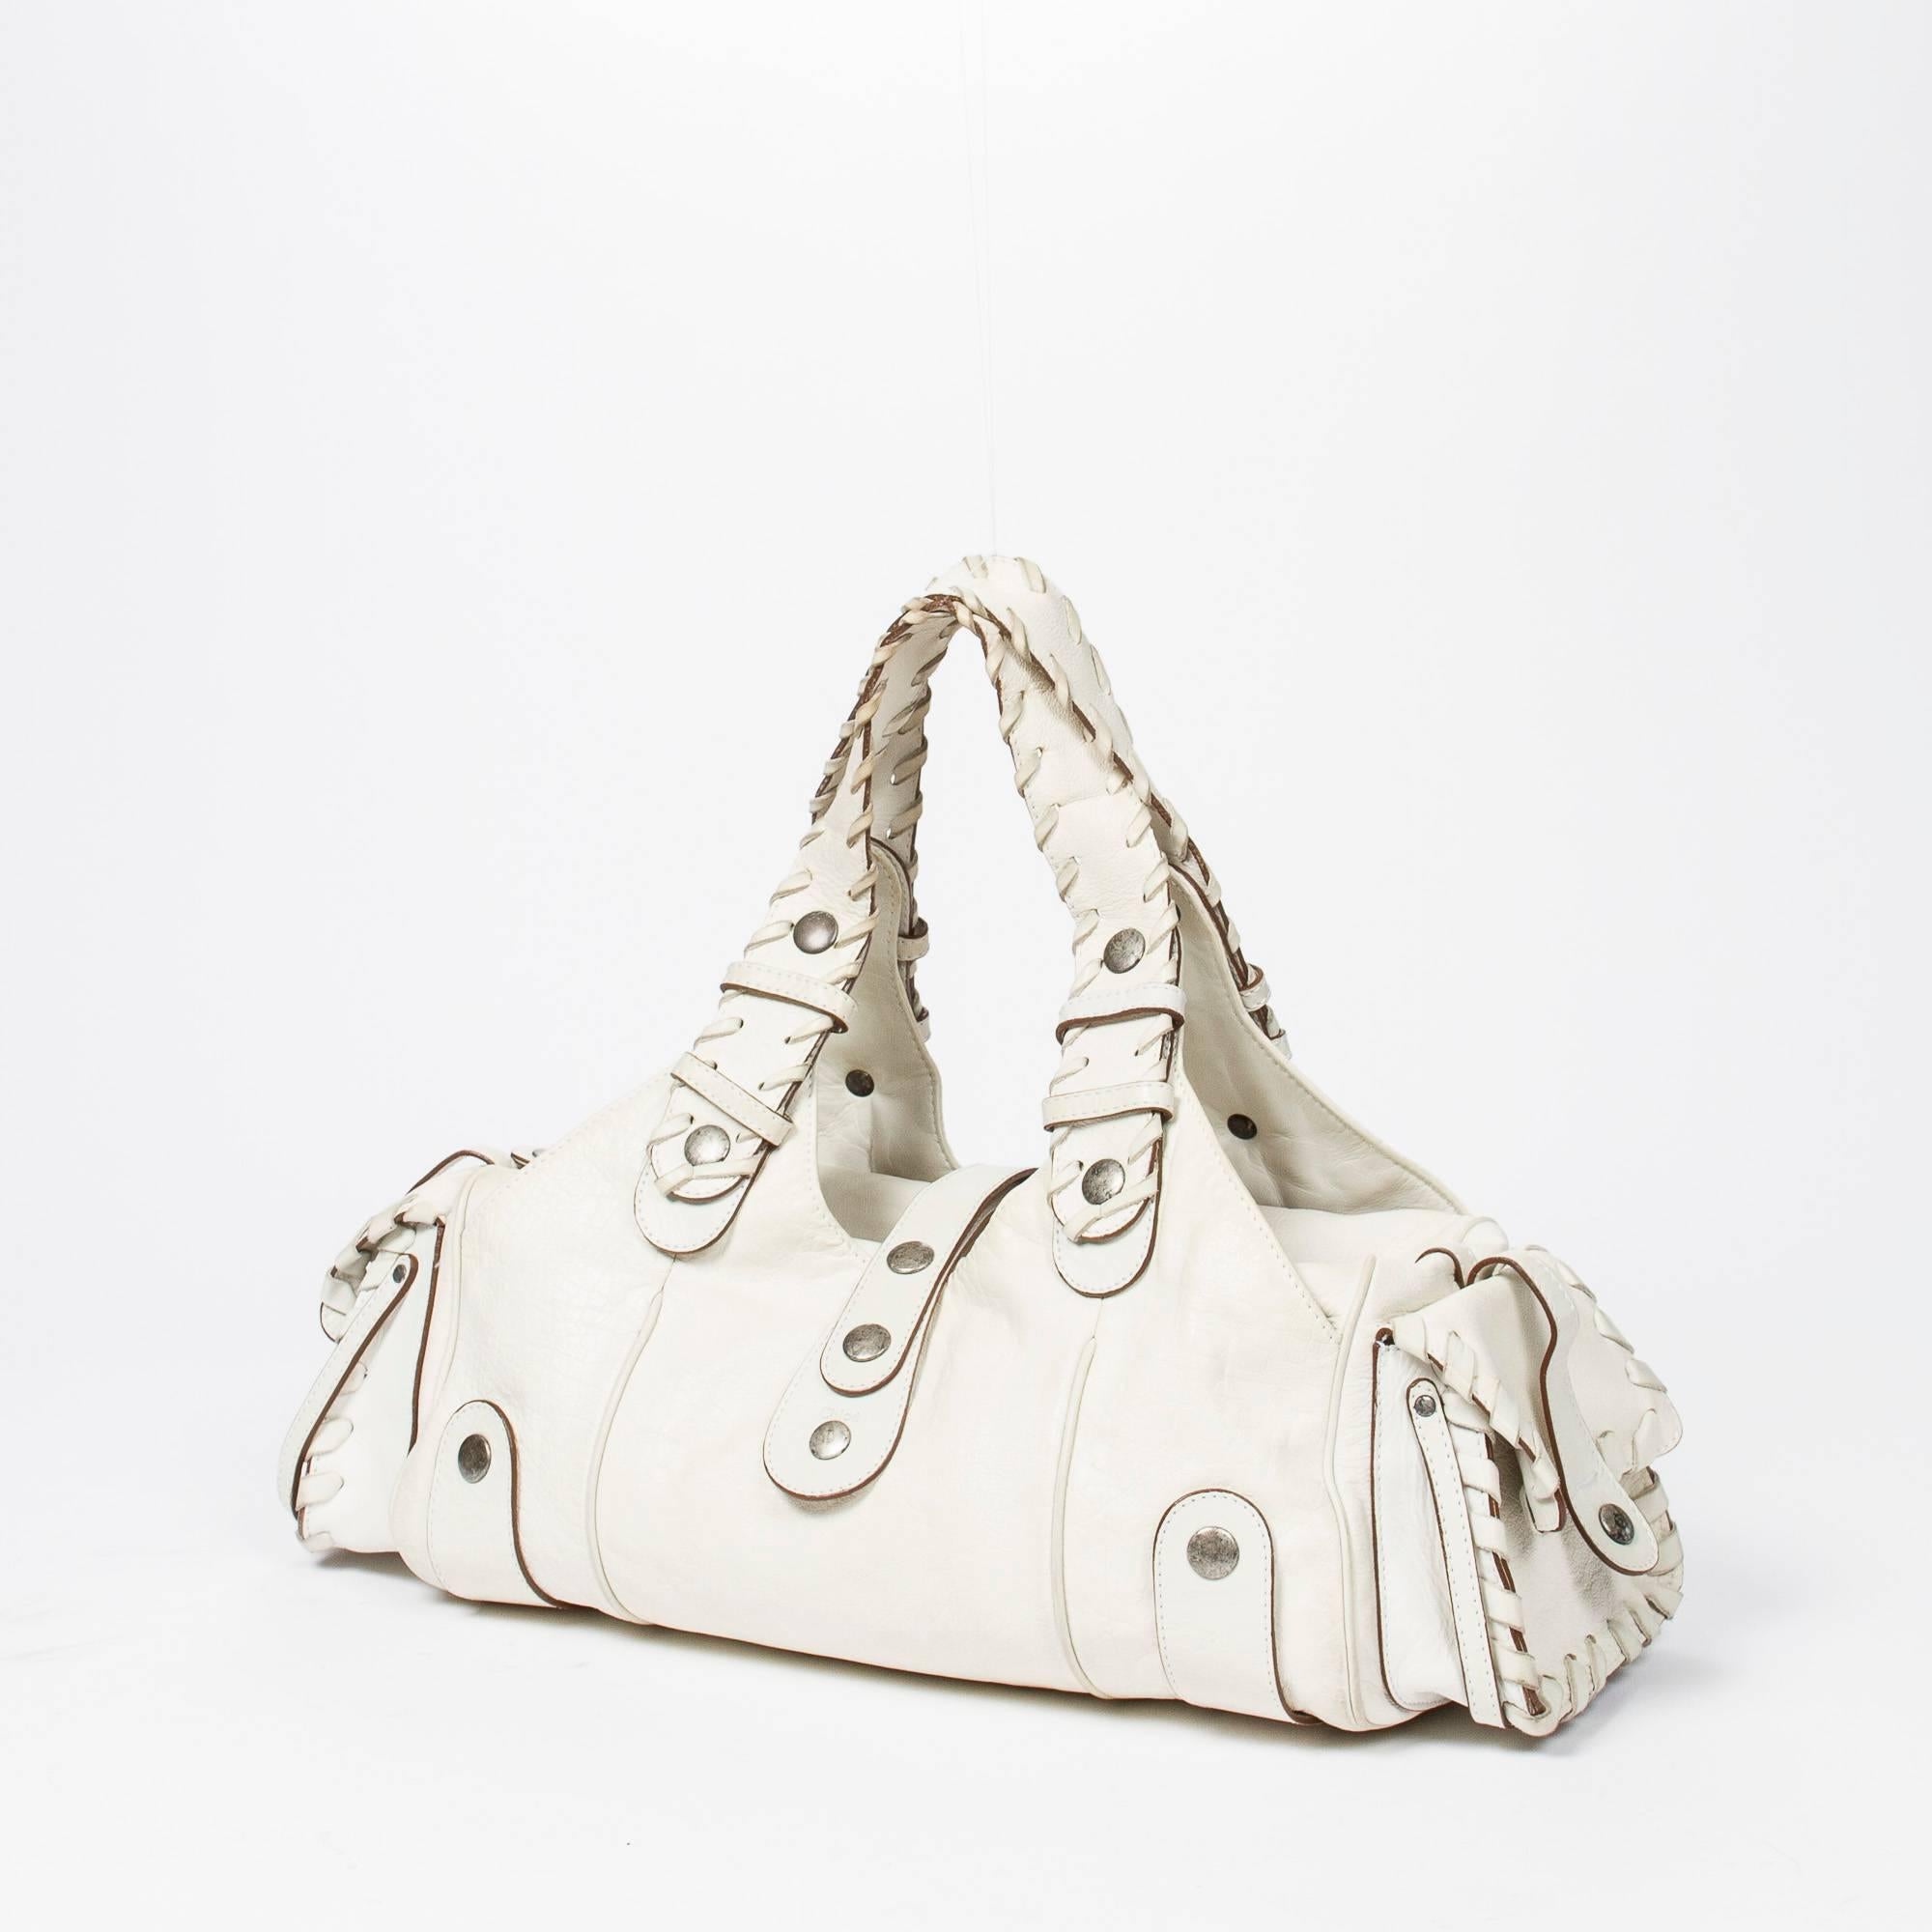 Handbag Chloe Silverado MM in white grained leather and brushed silver hardware.  Clean interior. Excellent condition.
